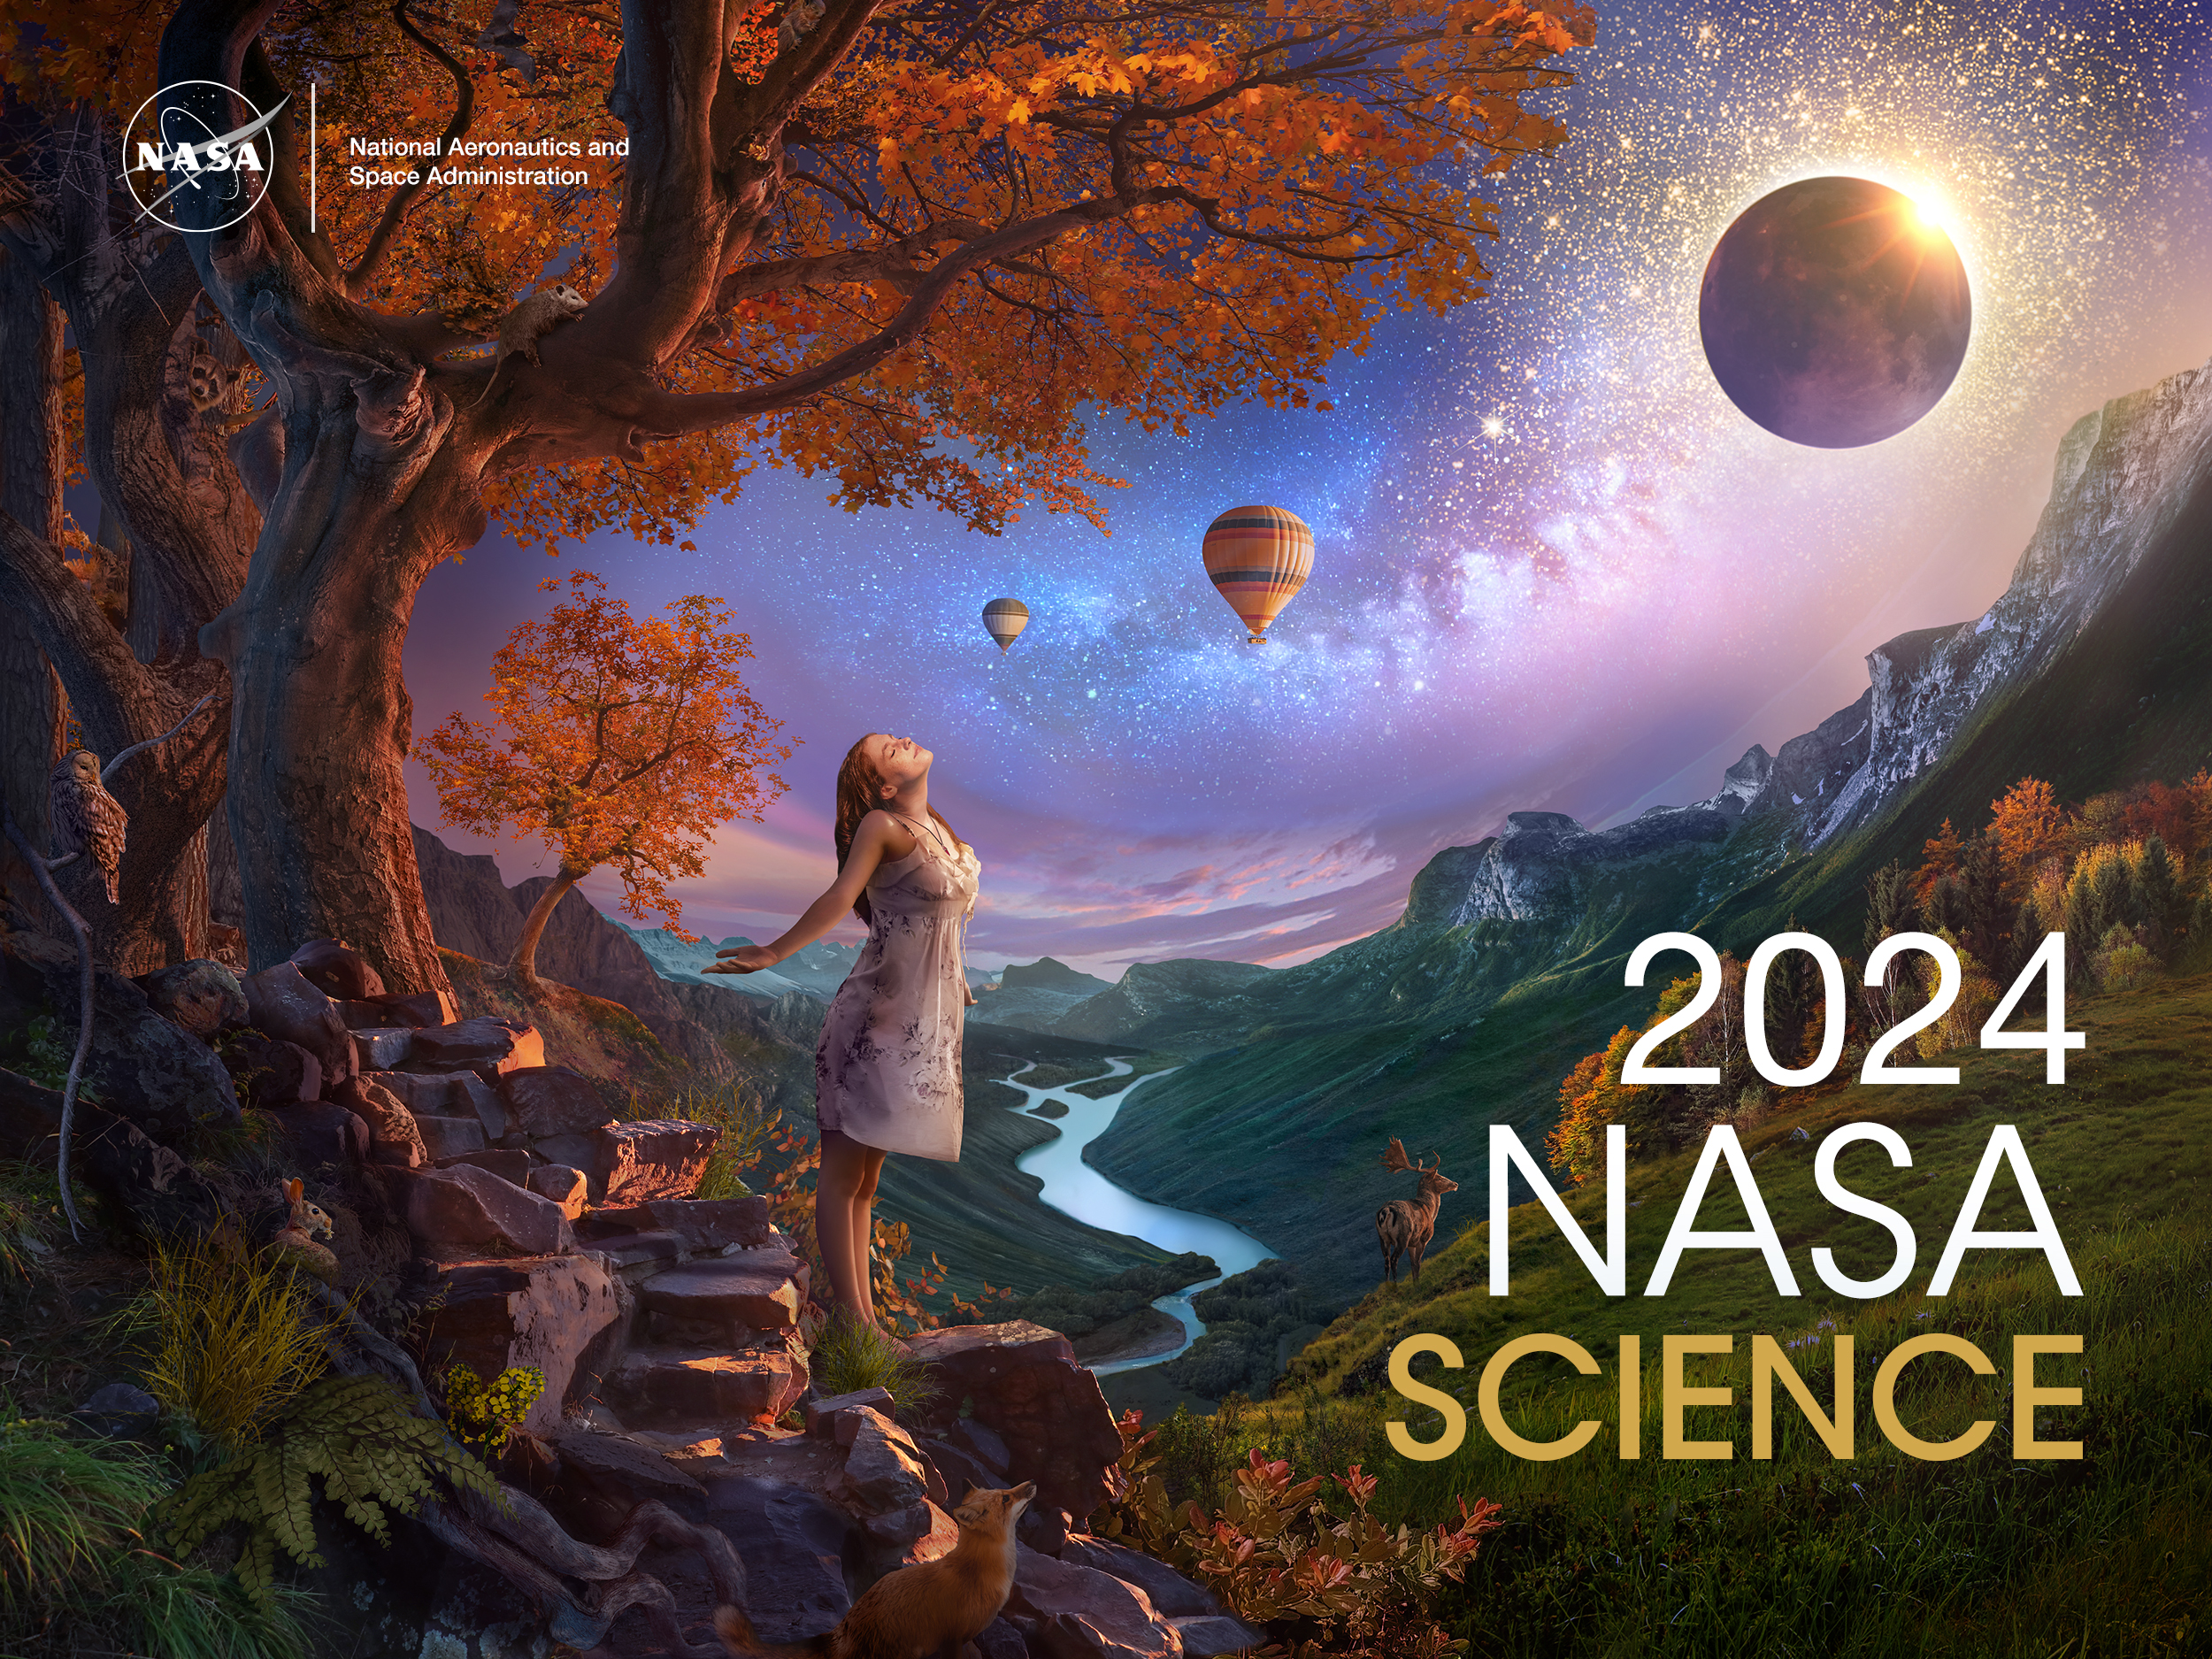 An artist’s concept of a landscape, composed of dusky purples, oranges, golds, and greens. In the left foreground, a young woman wearing a white dress basks in the rays of a solar eclipse. She stands under a bright orange fall tree rooted to the side of a rocky mountain trail. The scene overlooks a valley with a river running through the middle towards distant hazy blue mountains. Nocturnal animals – including a fox, owl, possum, and bat – emerge to investigate the sudden onset of night. A deer stands on a grassy knoll at right in front of a line of fall colored trees. The Milky Way trails across the sky, leading up from the young woman to the eclipse and glittering stars at top right. Two hot air balloons float in the distance. This concept was created in celebration of the Heliophysics Big Year, which is bookended by the Annular Eclipse in October of 2023 and the Total Solar Eclipse in April of 2024. 125%